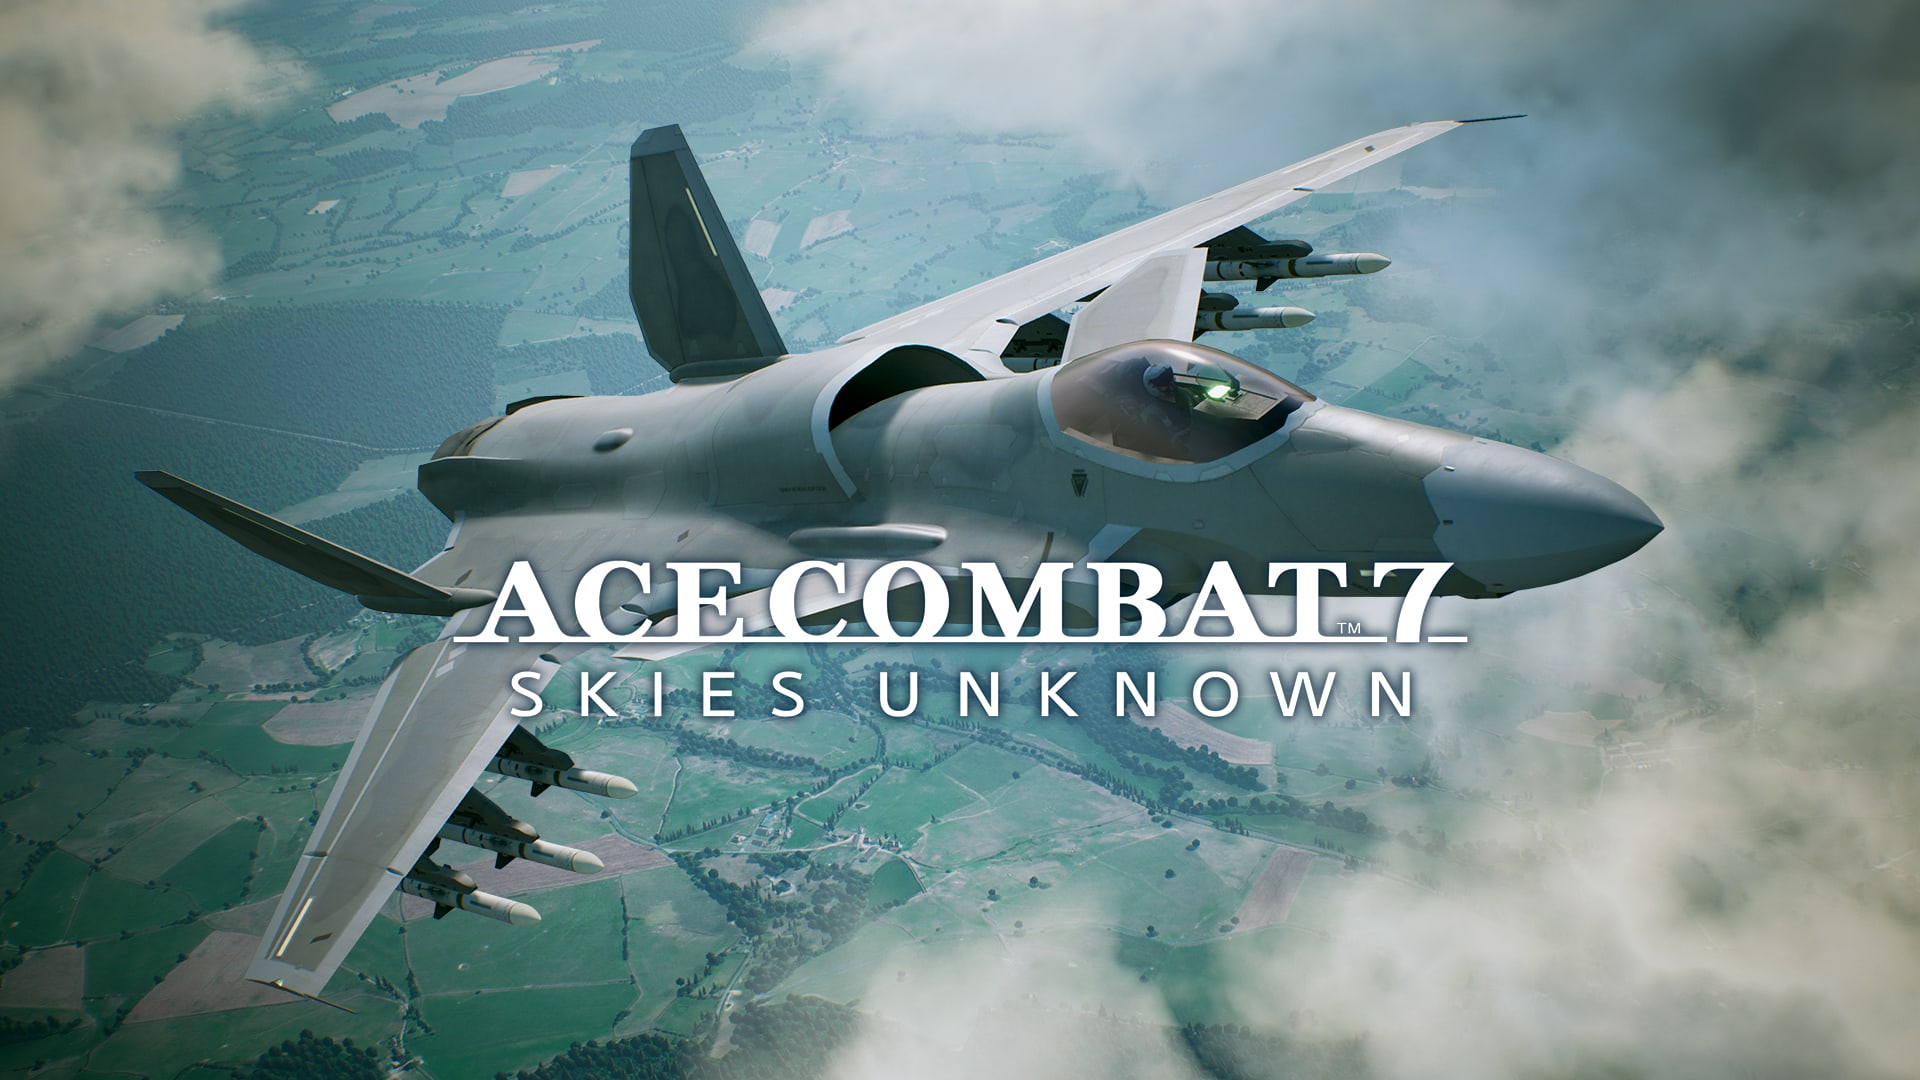 ACE COMBAT™7: SKIES UNKNOWN - ASF-X Shinden II Set